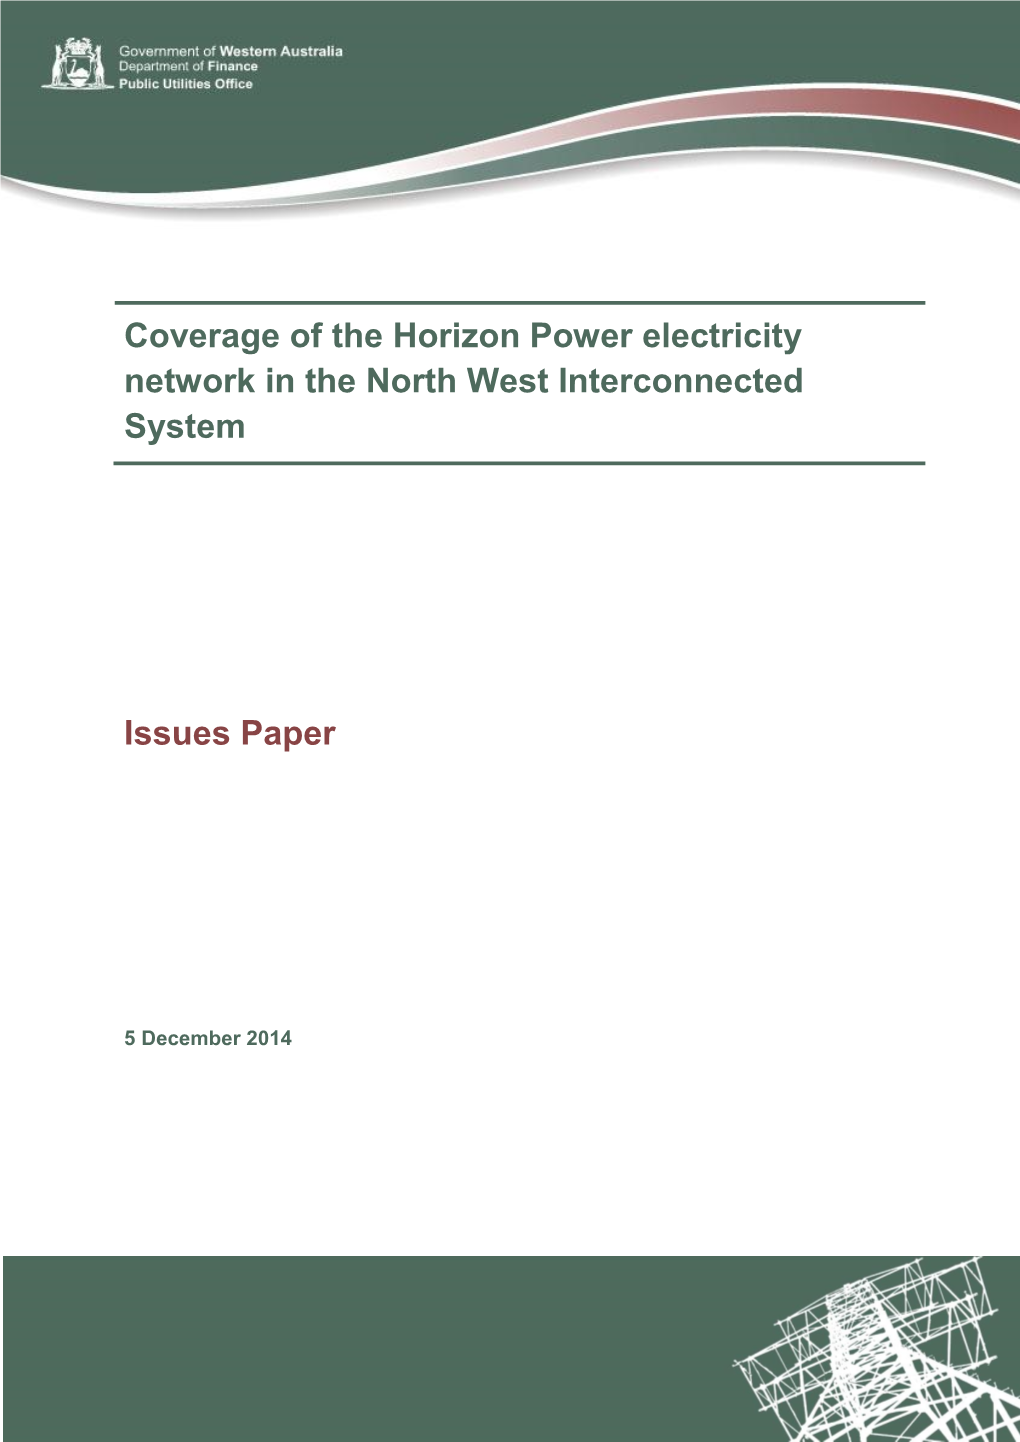 Coverage of the Horizon Power Electricity Network in the North West Interconnected System